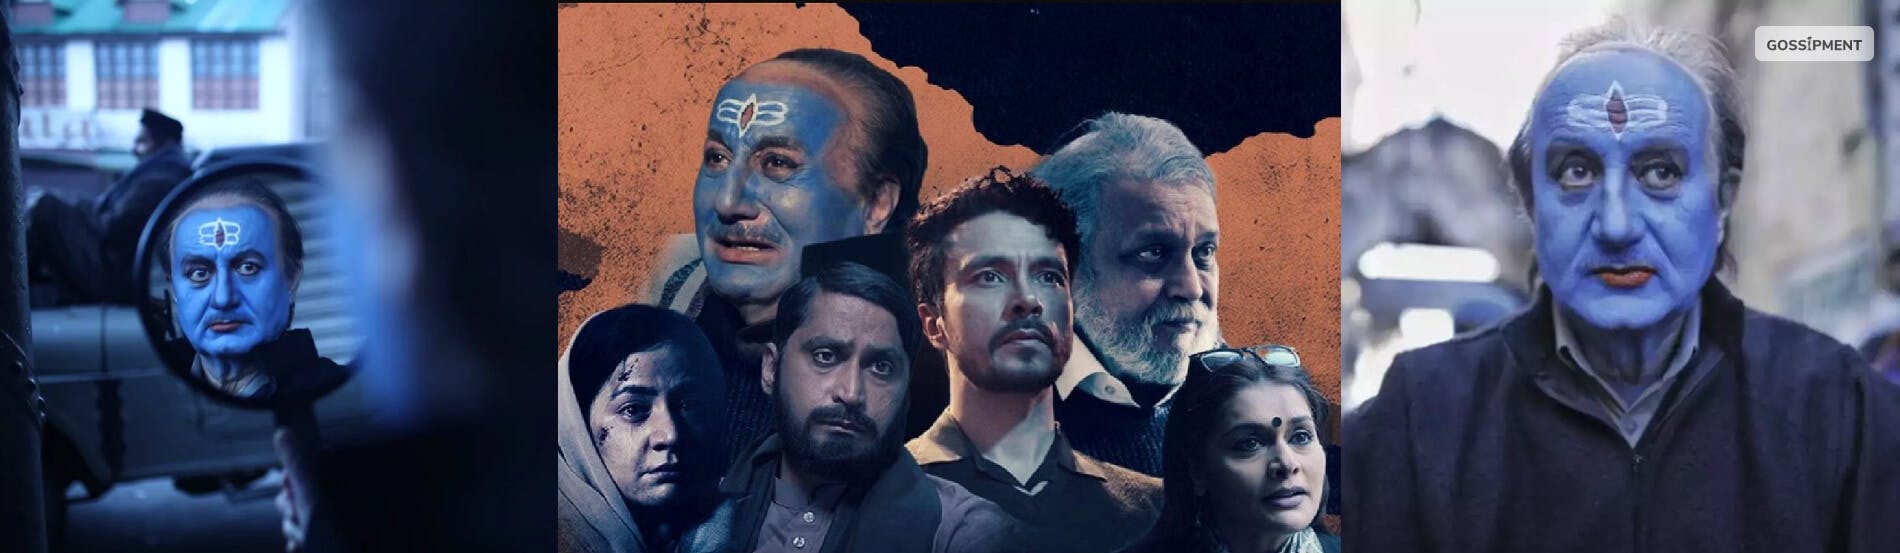 Cover Image for Anupam Kher Is Nominated for #BestActor Academy Awards For The Kashmir Files In Oscar 2023